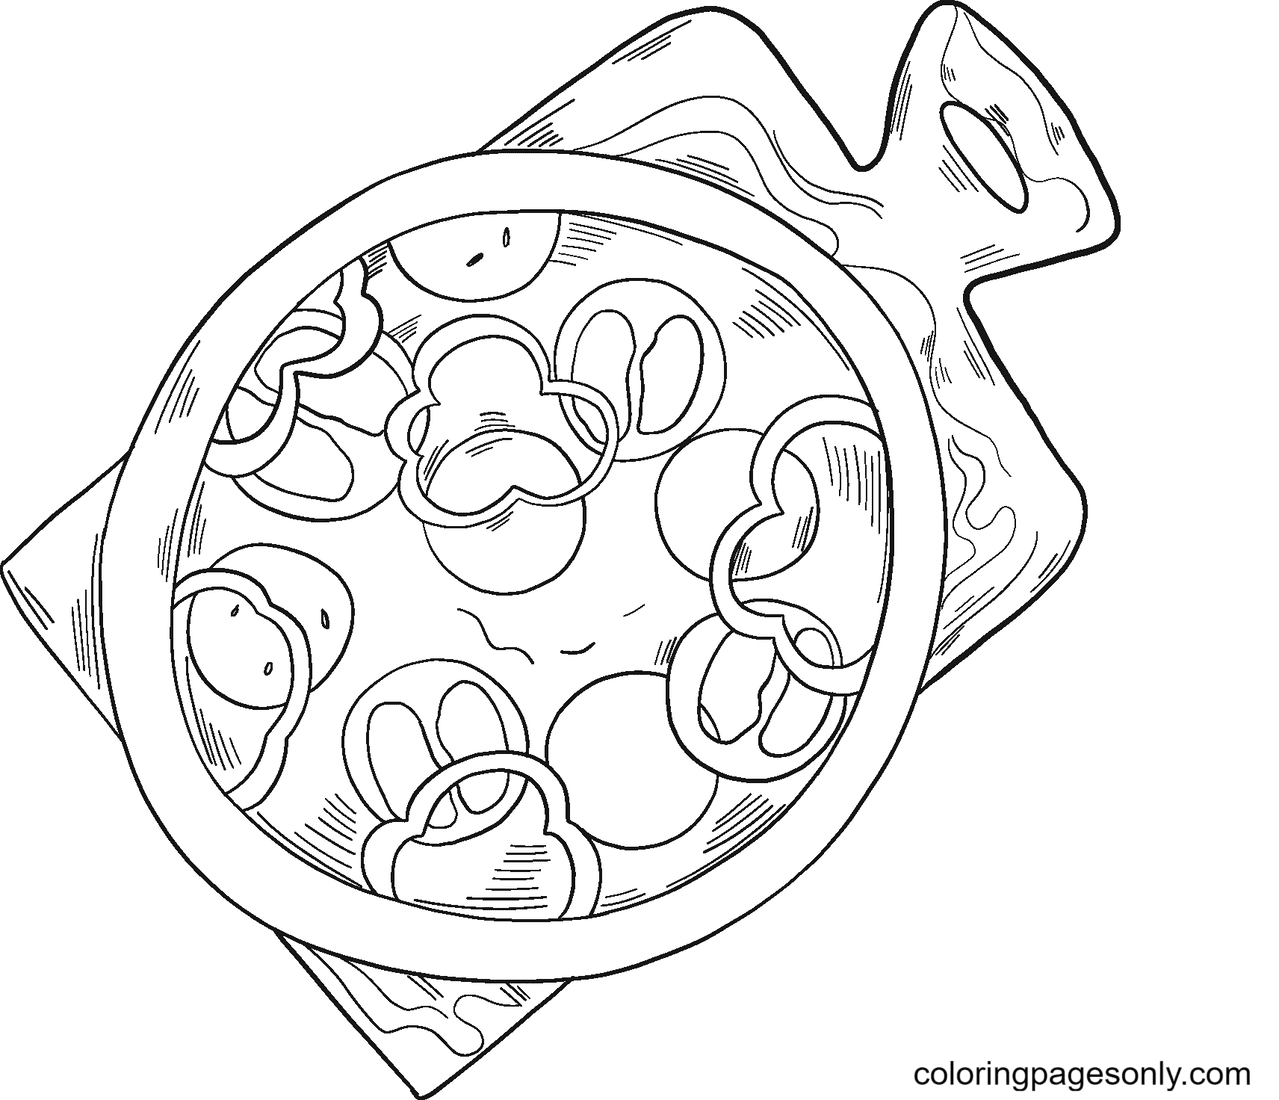 Pizza extremely tasty with pepperonis and vegetable Coloring Page